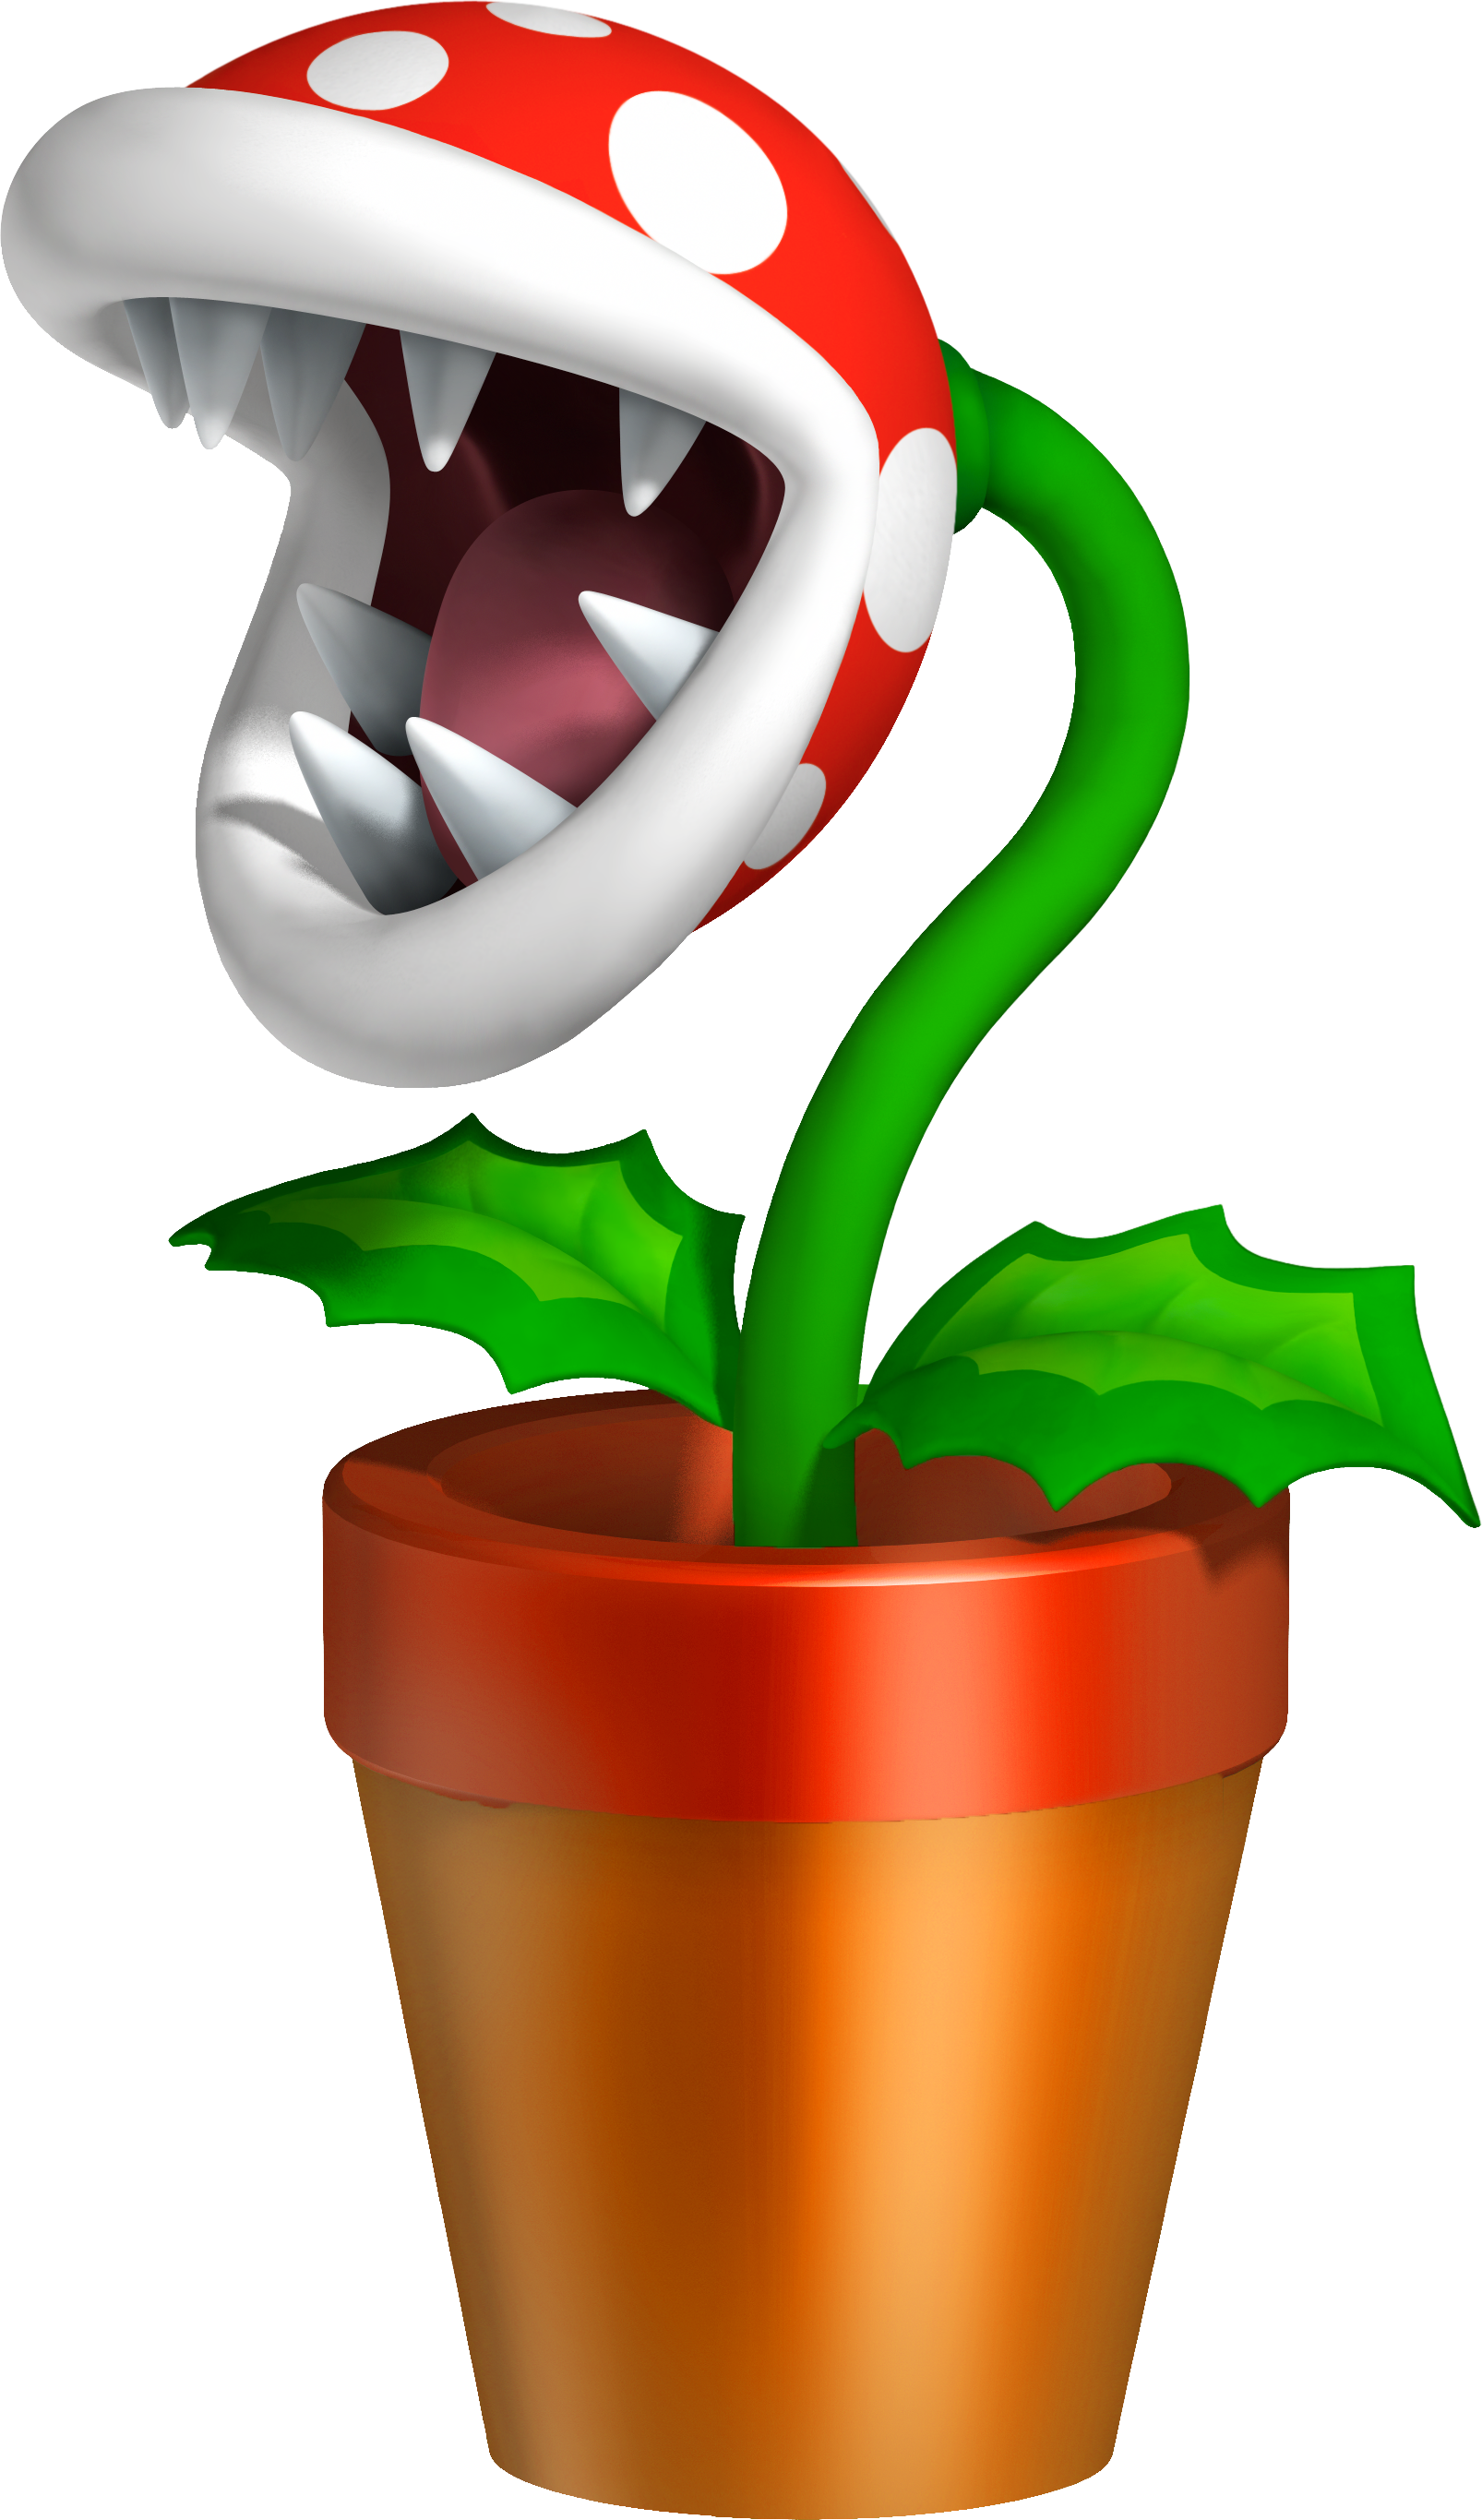 Potted Piranha Plant - Mario Kart Wii.png